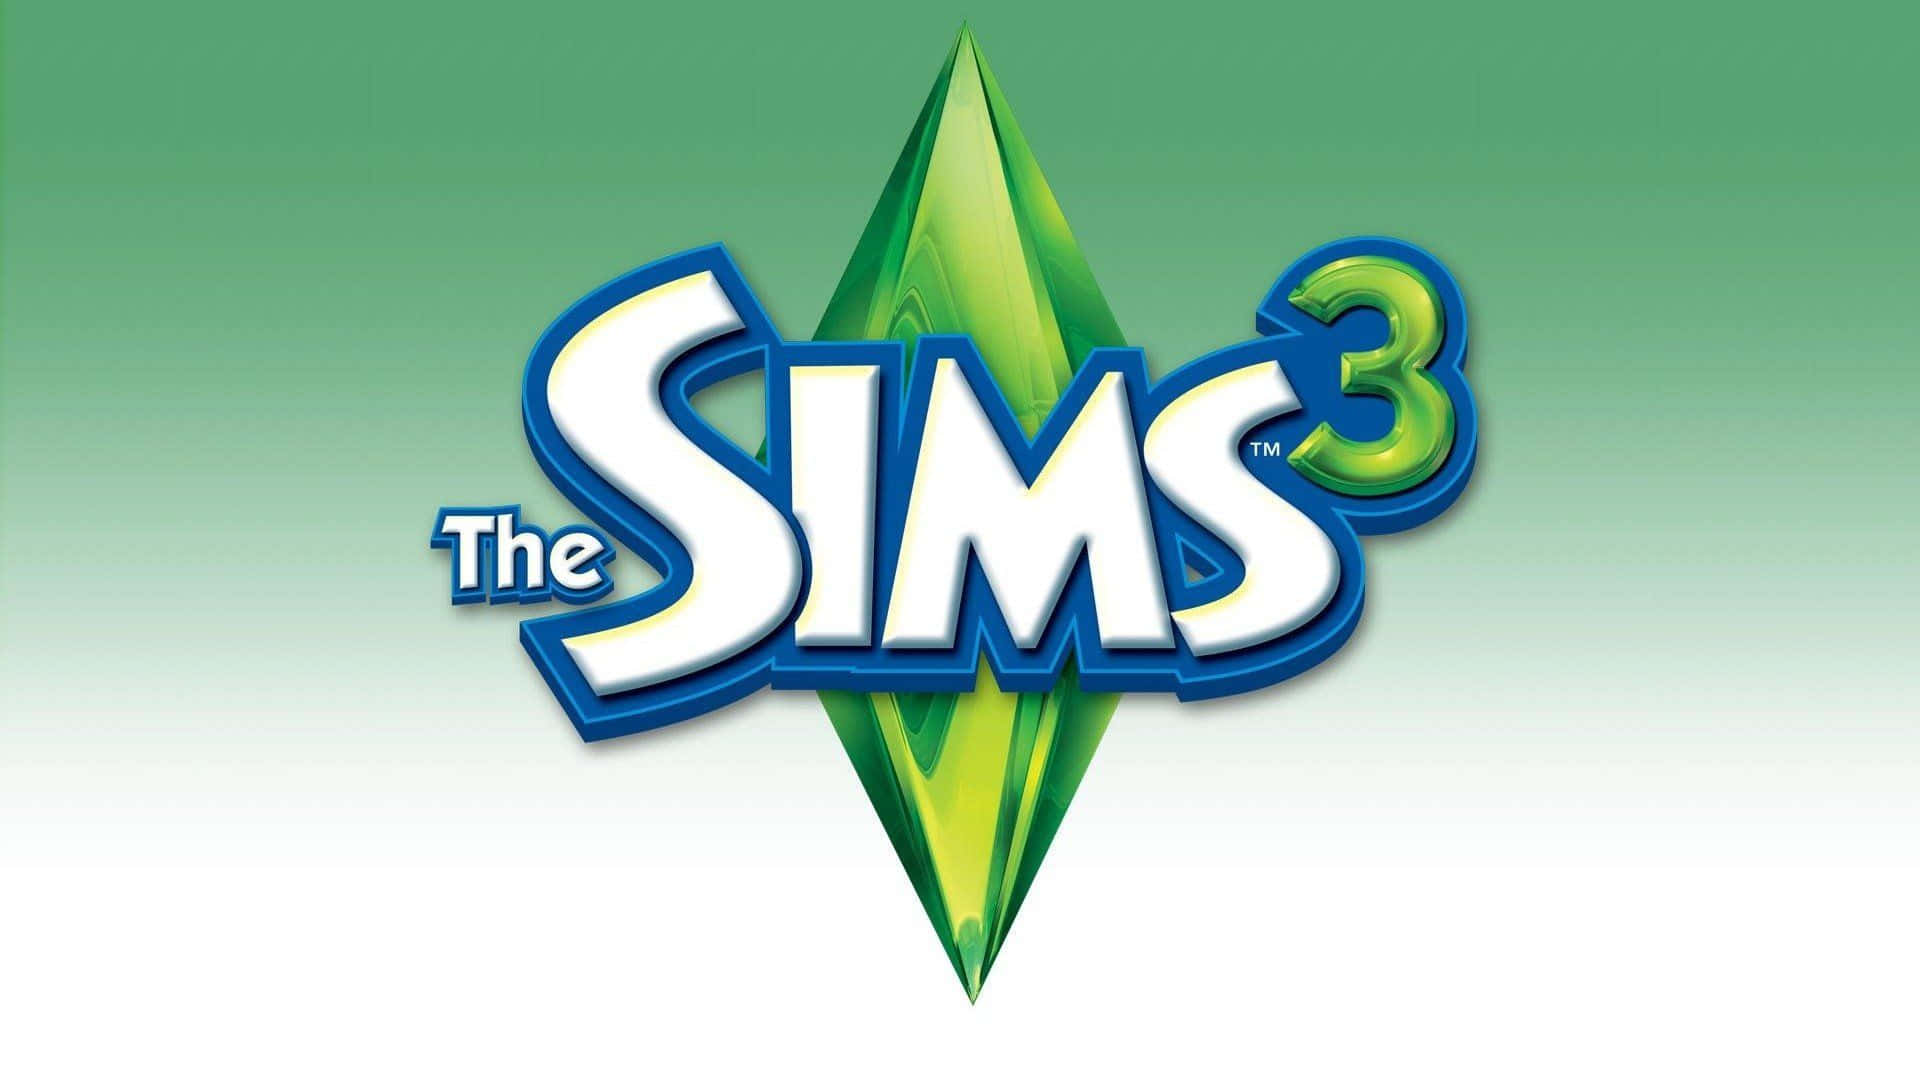 The Sims 3 Background Wallpaper